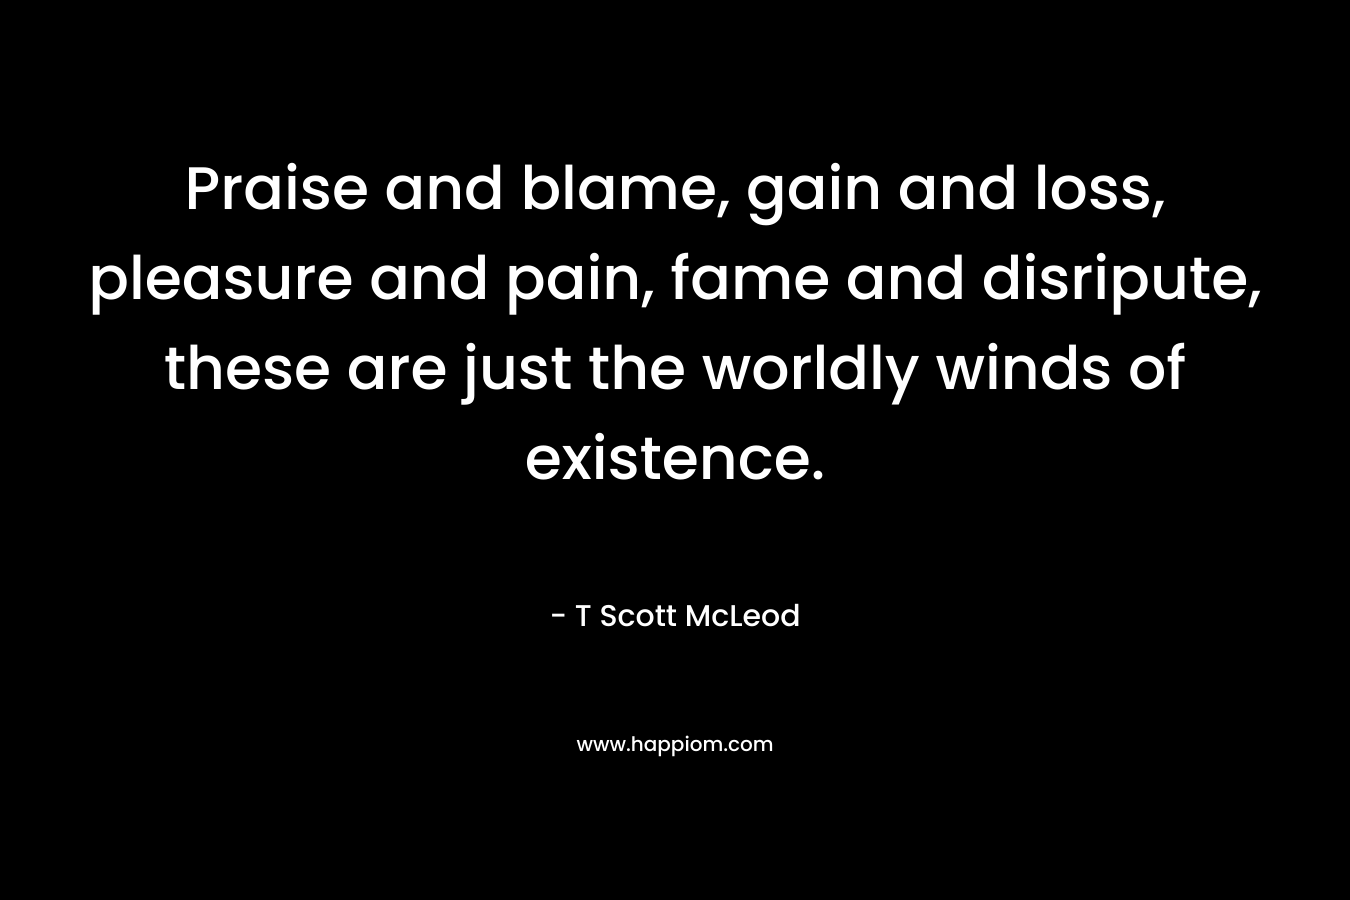 Praise and blame, gain and loss, pleasure and pain, fame and disripute, these are just the worldly winds of existence. – T Scott McLeod